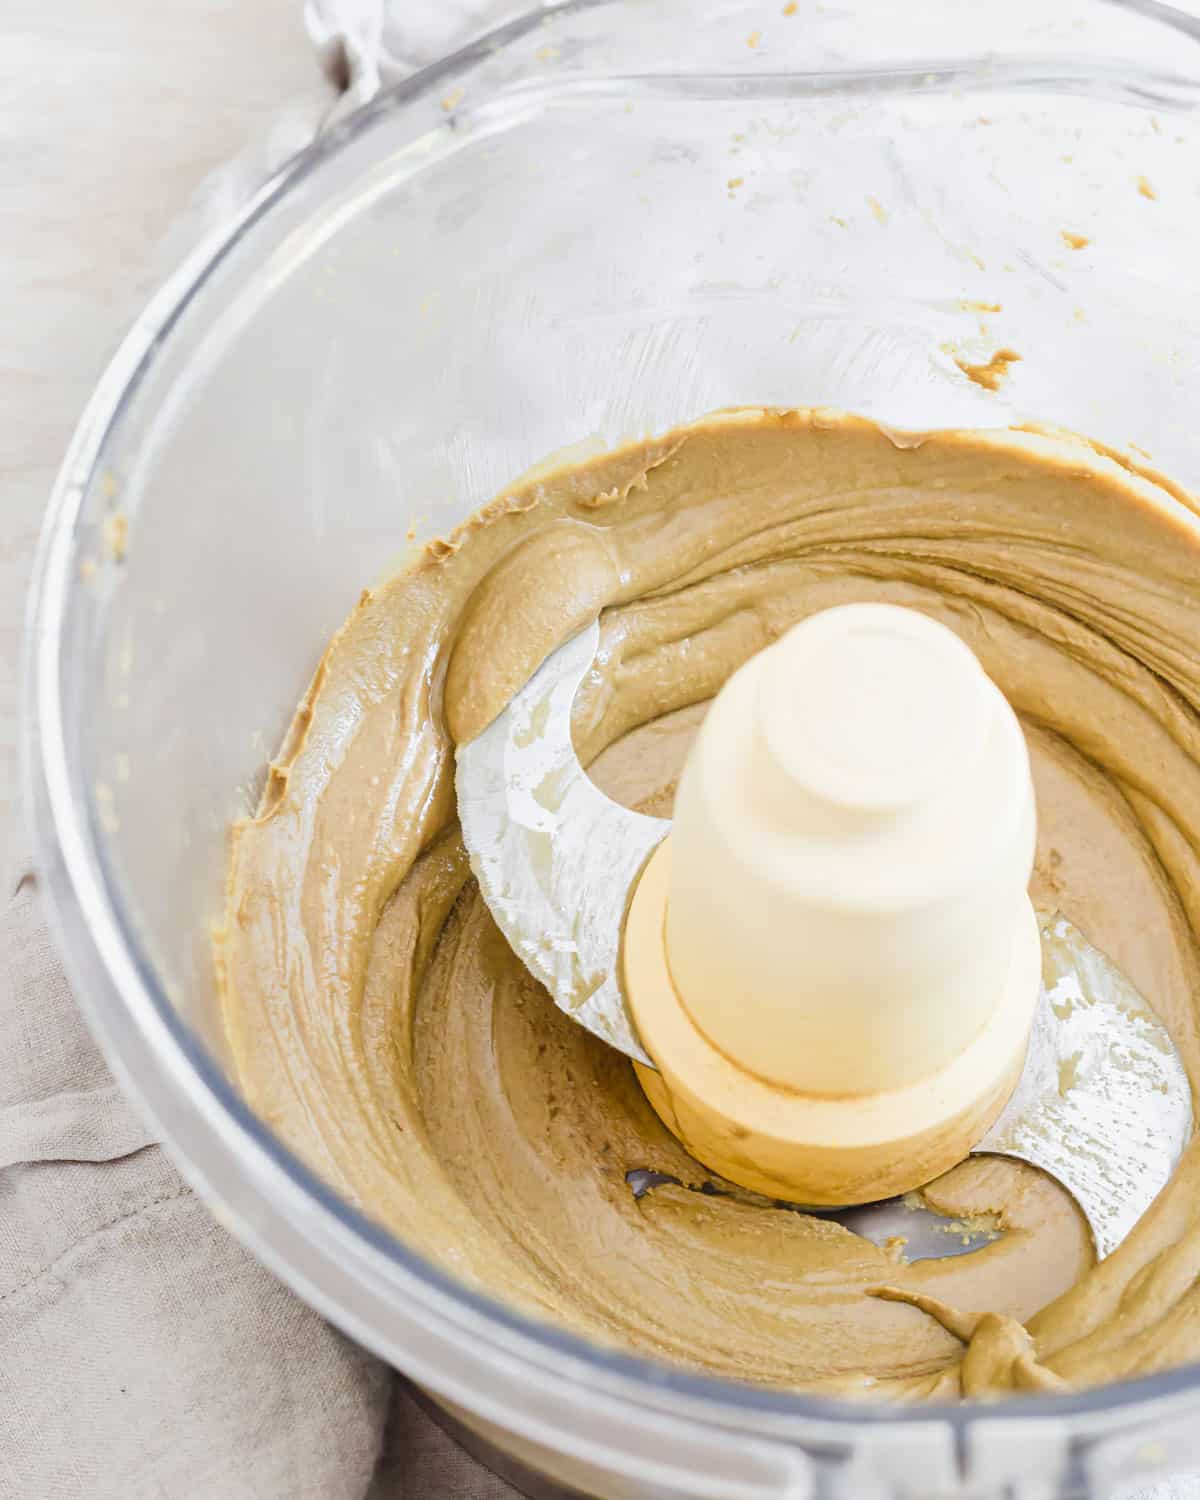 Creamy pumpkin seed butter in a food processor after 10 minutes.